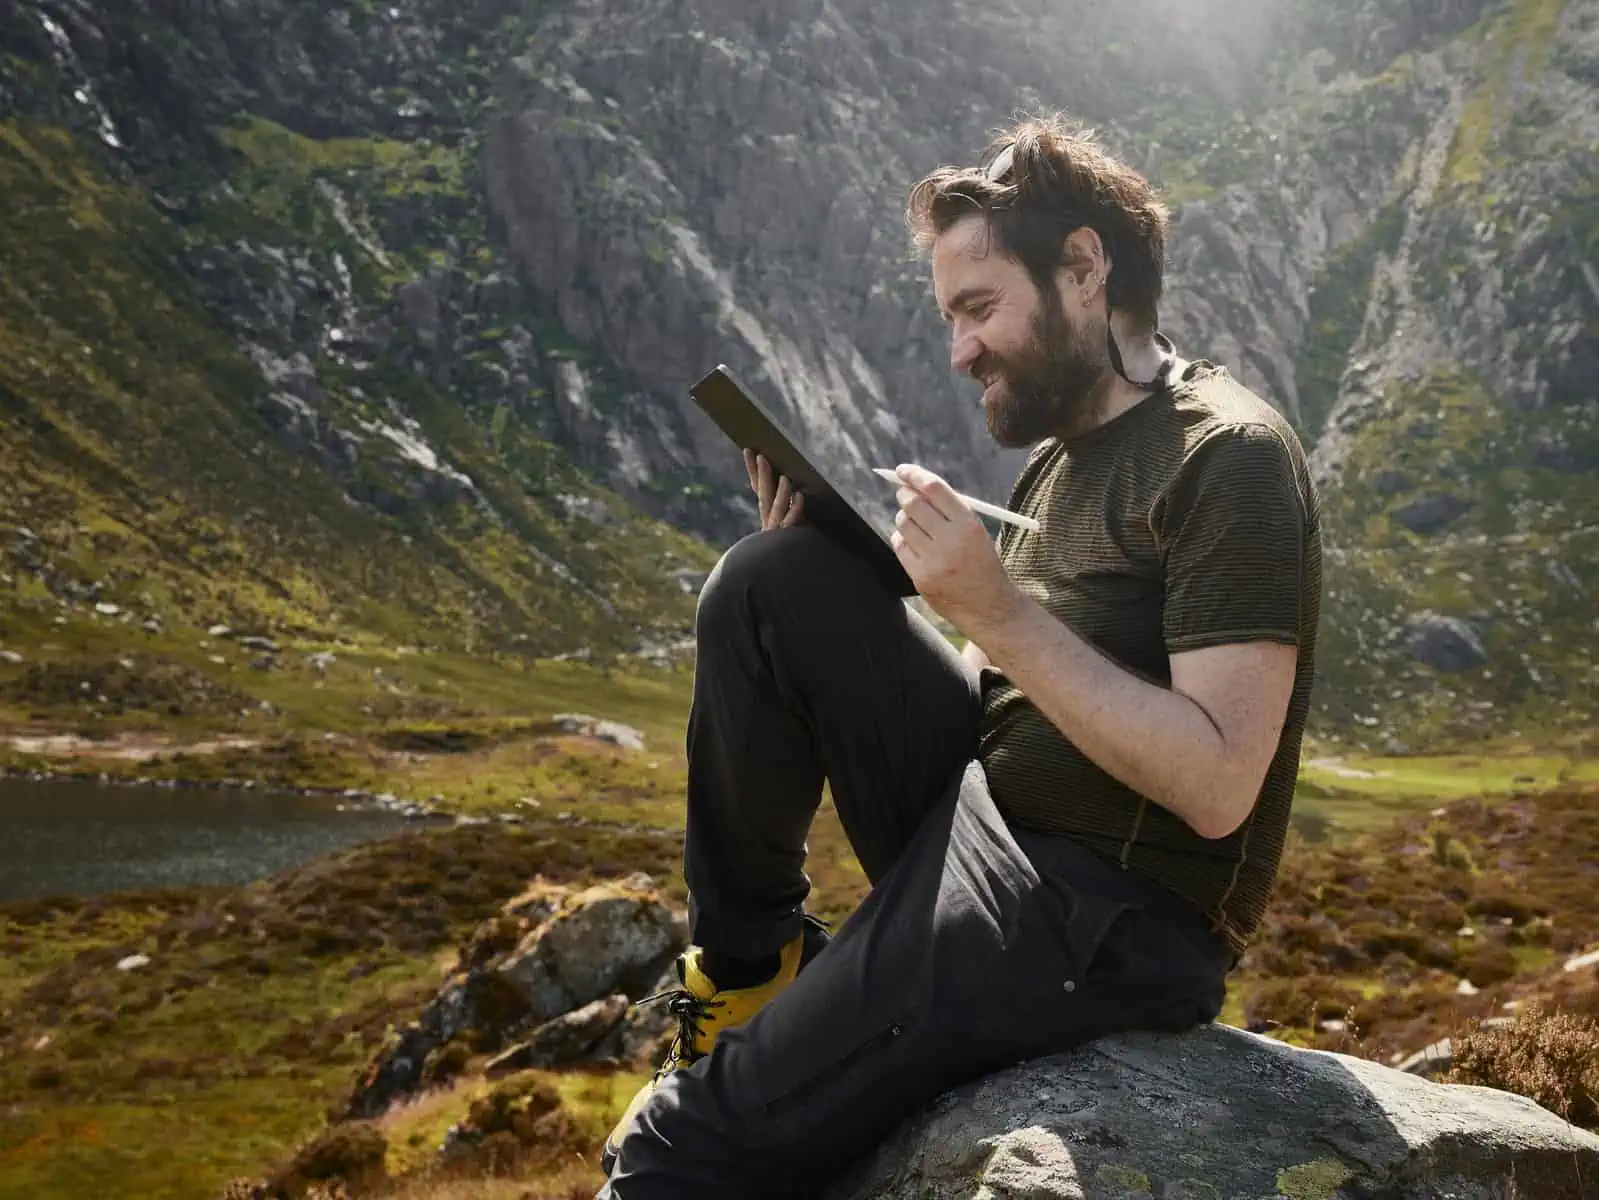 ID: A landscape image. Matt is sat on a rock in a mountainous, slightly out of focus scene working on his iPad and working up an image on Affinity Photo on location. He is wearing yellow shoes, black trousers, green top and is using an iPad with a white Apple Pencil.